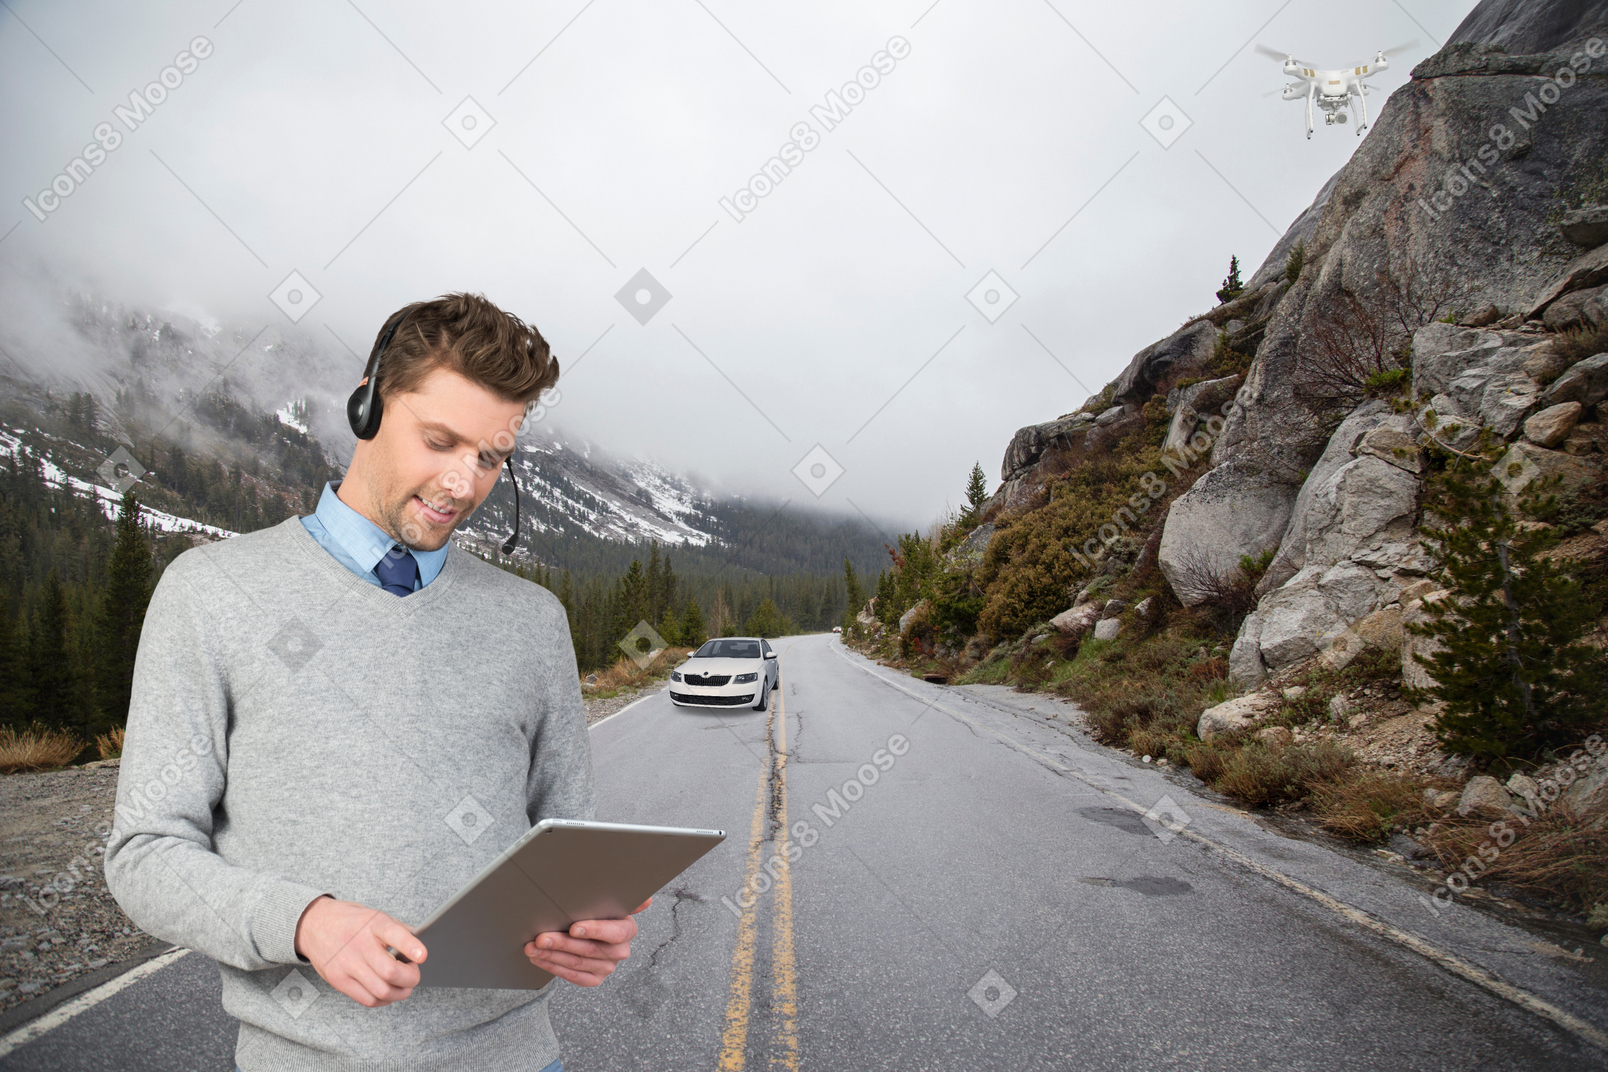 A man wearing headphones is looking at a tablet